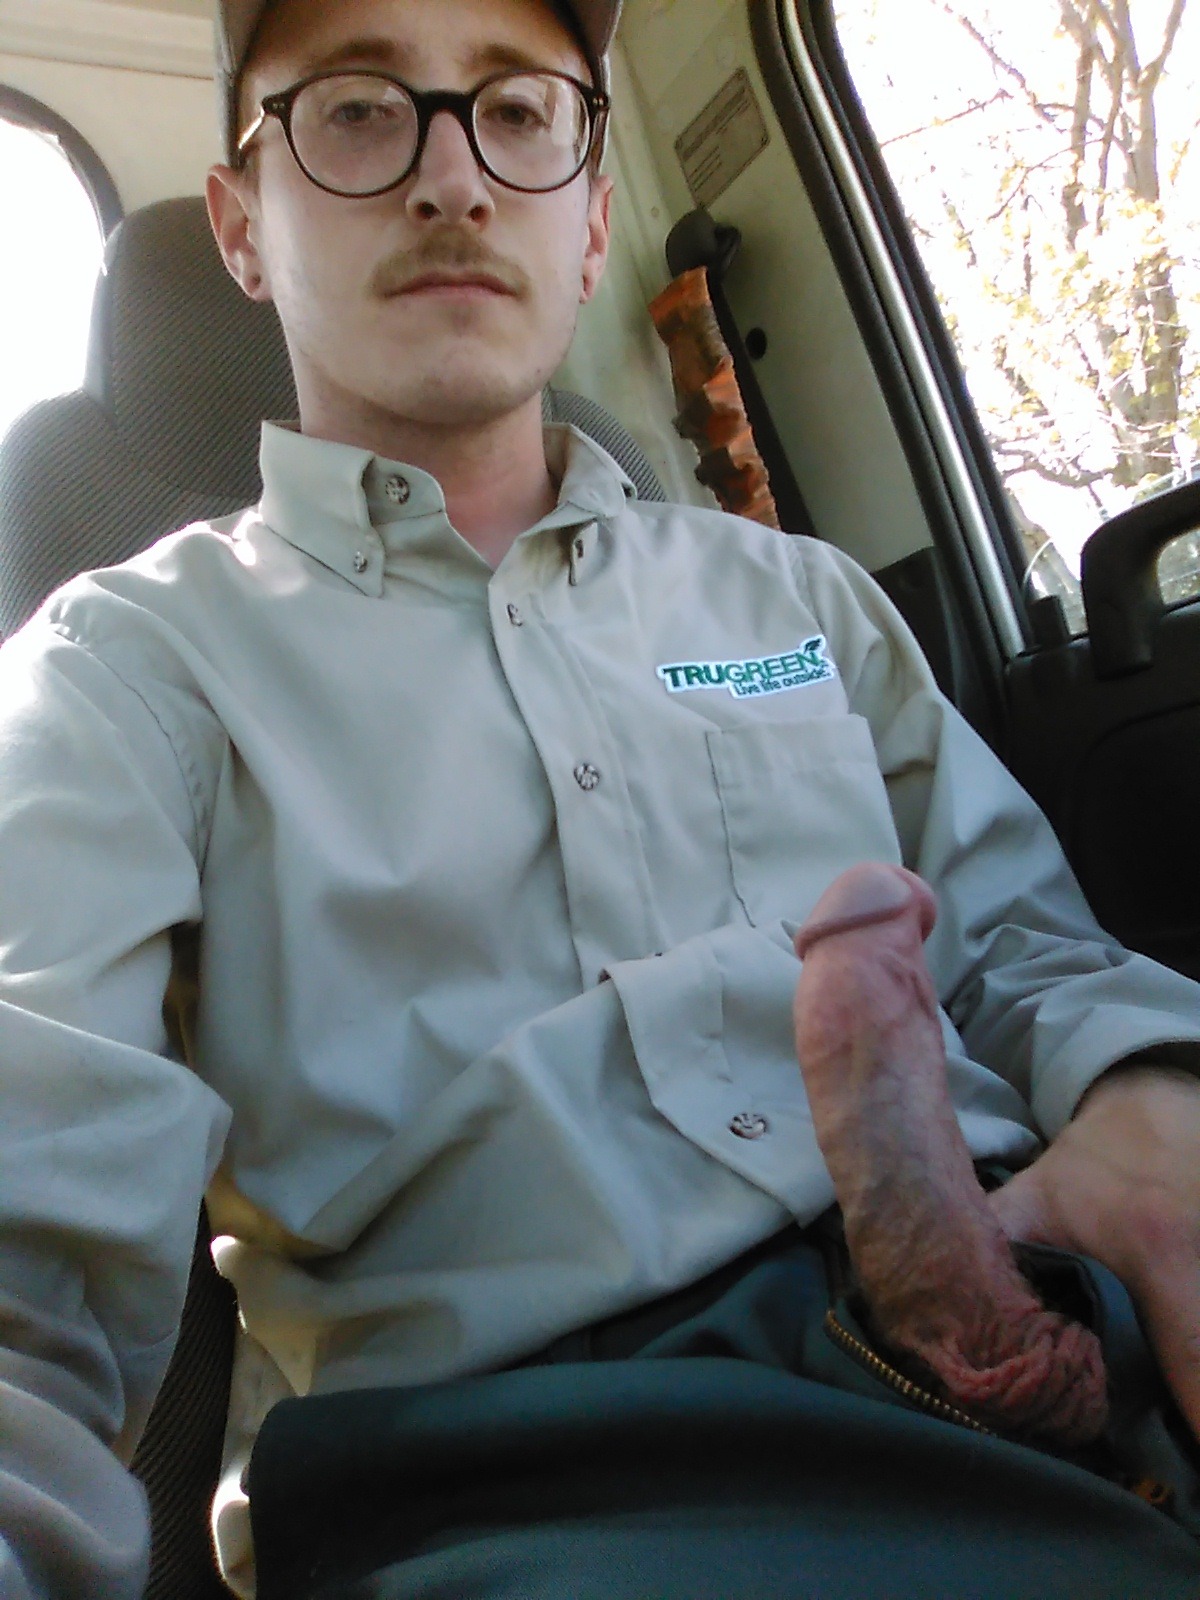 buttscockandfur:
“horny while working again
”